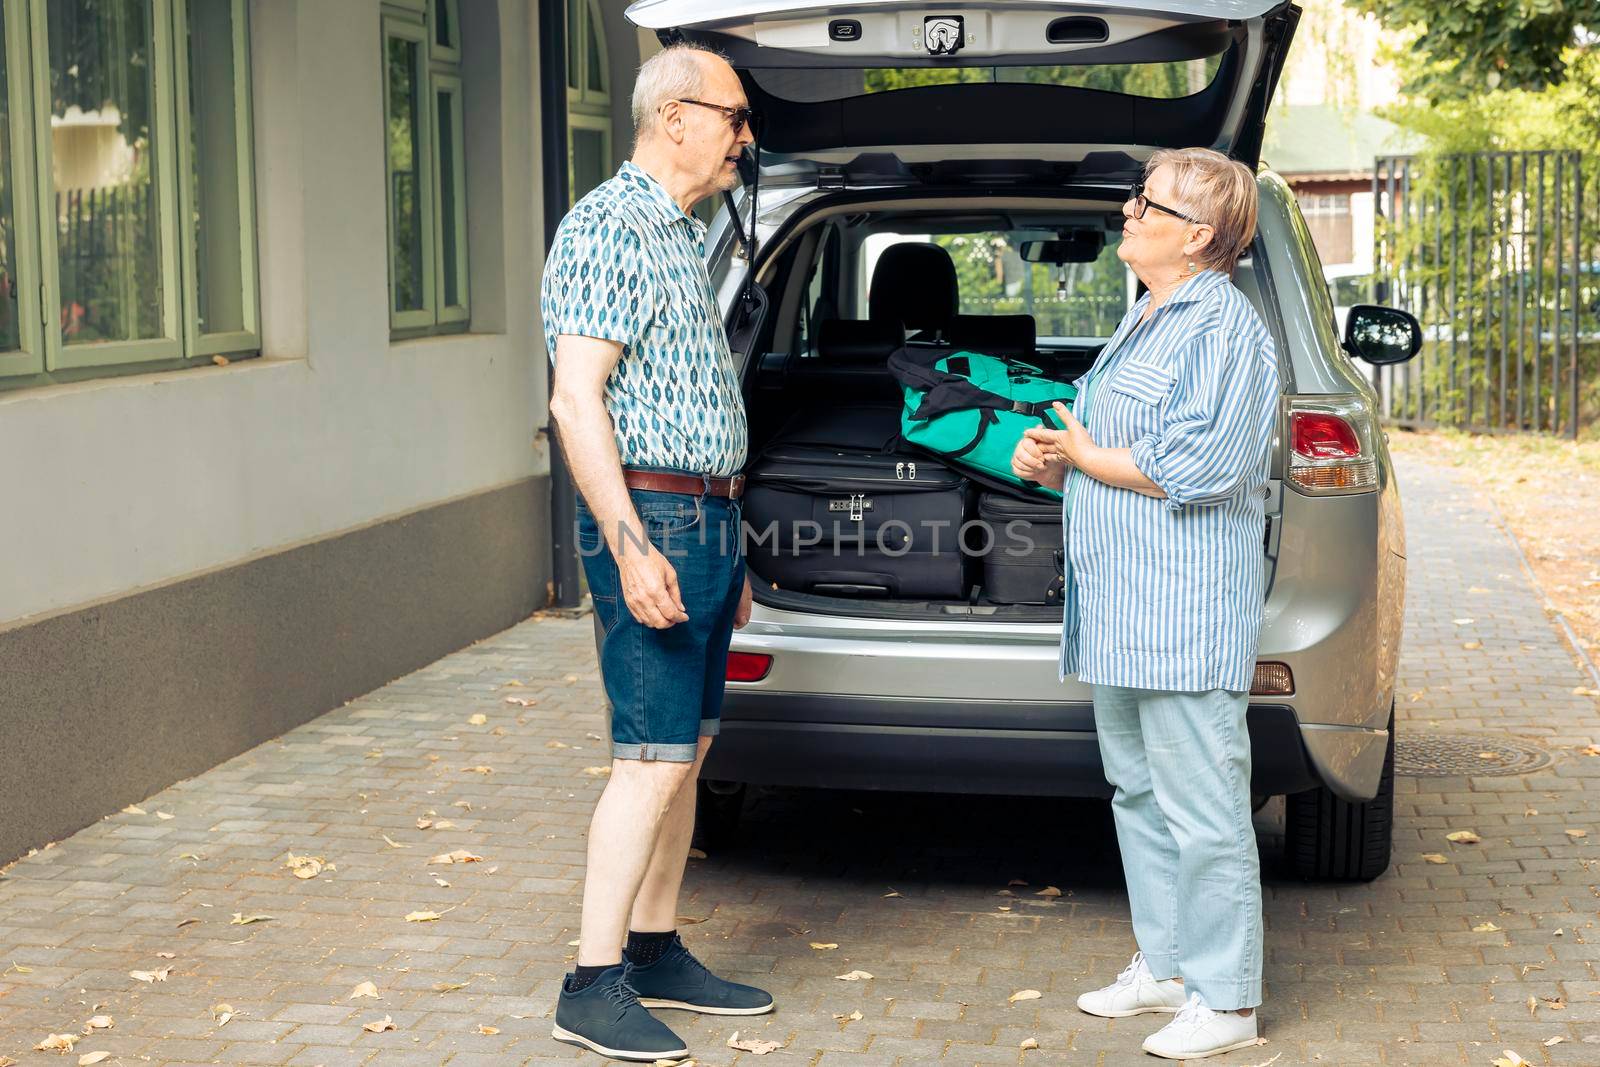 Aged people going on holiday vacation, loading suitcase and luggage in automobile trunk at home. Travelling by car with baggage and bags, leaving onubran cityscape adventure trip.